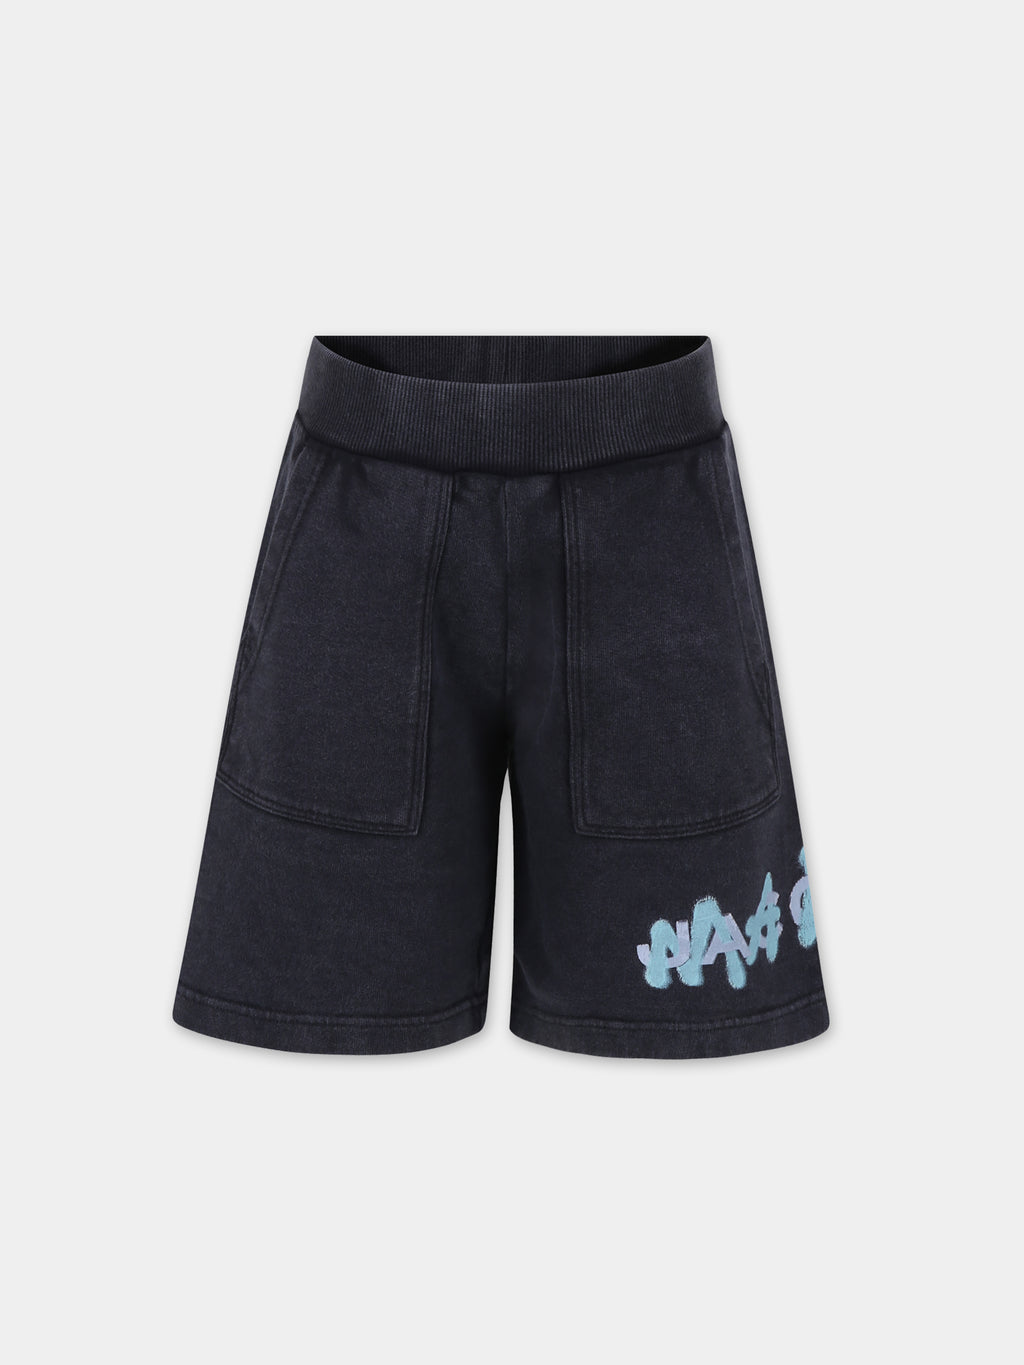 Black shorts for boy with logo